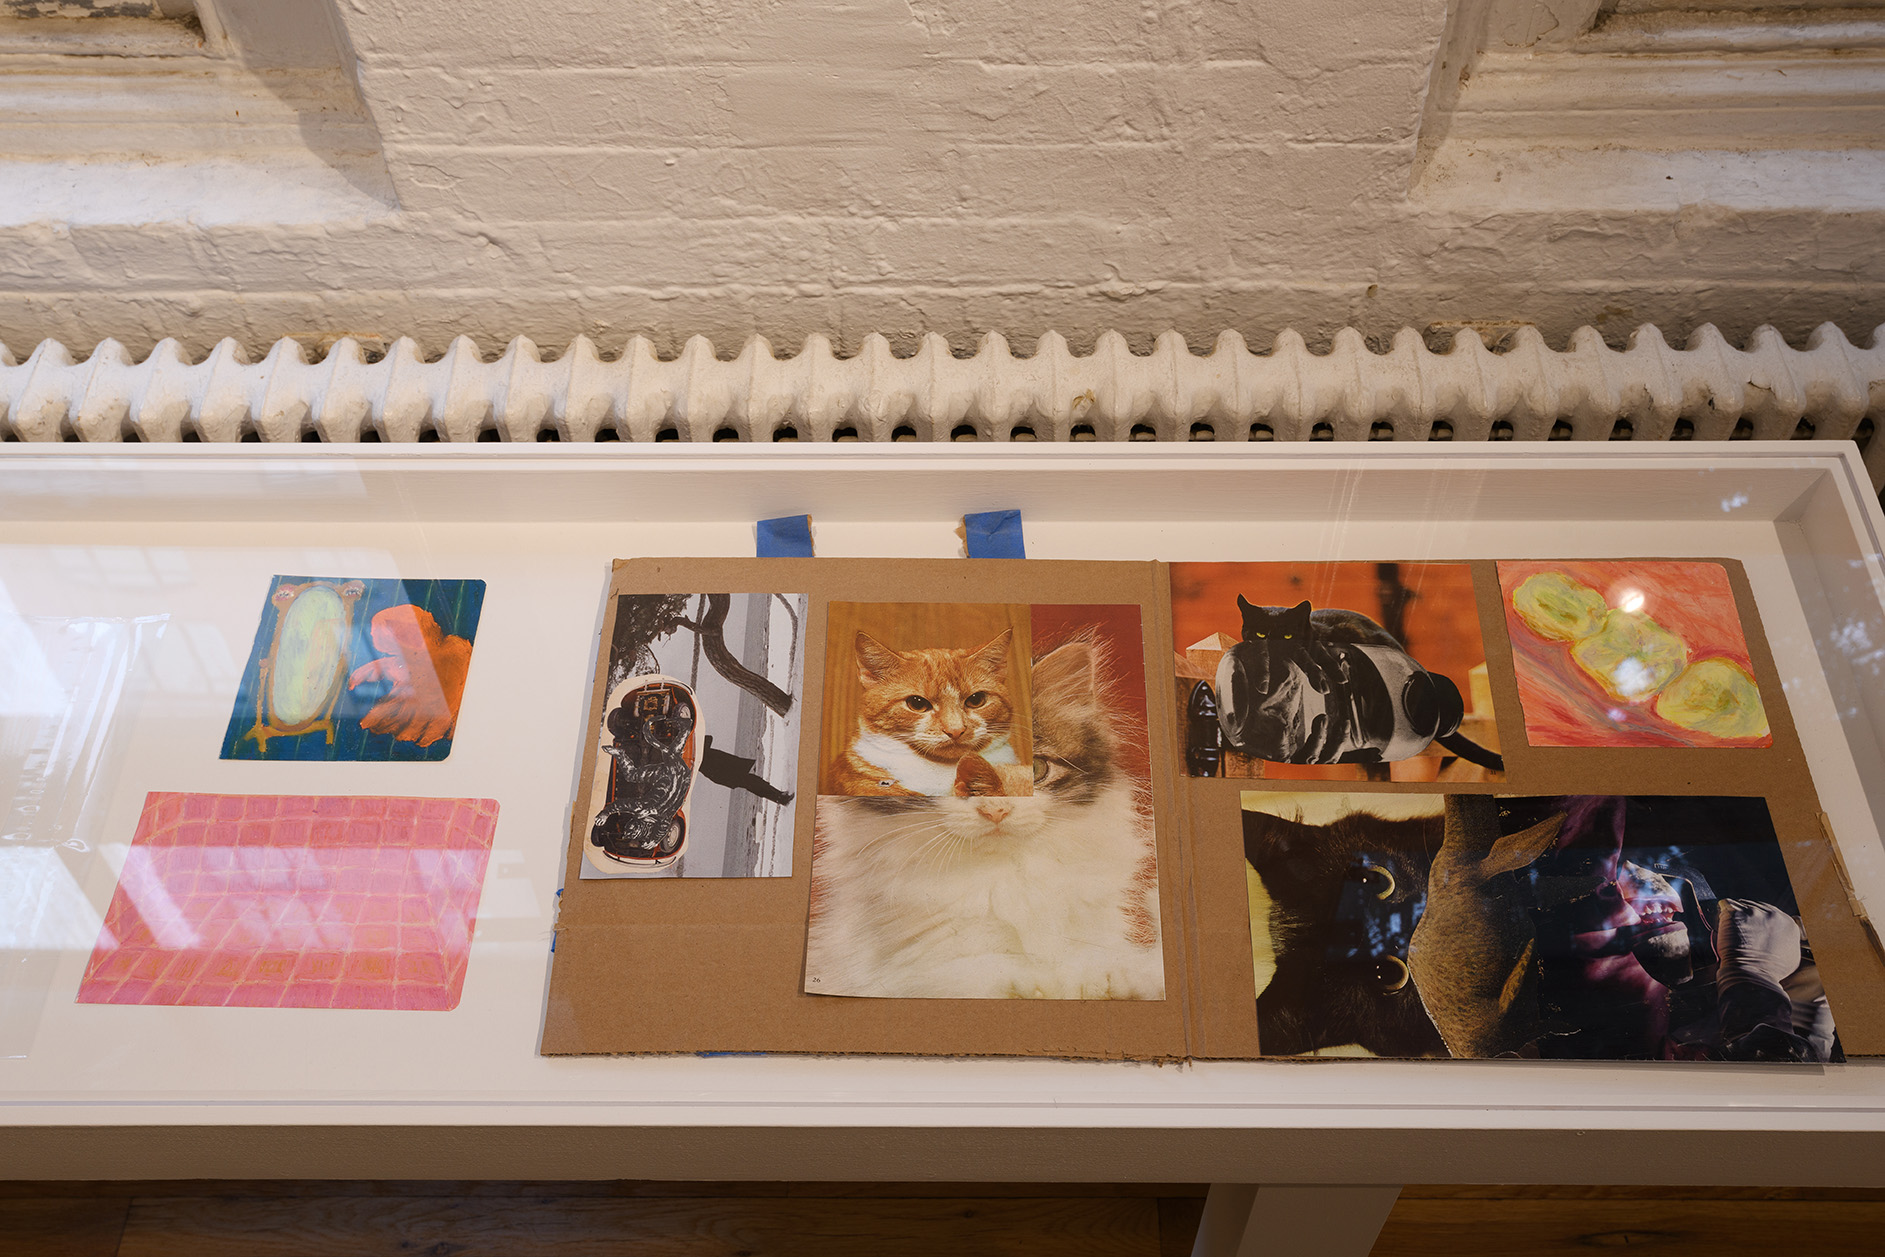 [A closeup image of the display, featuring oil pastel drawings–one primarily pink, one multi-colored, and one of a molar tooth surrounded by pink gums–as well as a series of collages of black and orange tabby cats presented on cardboard.]